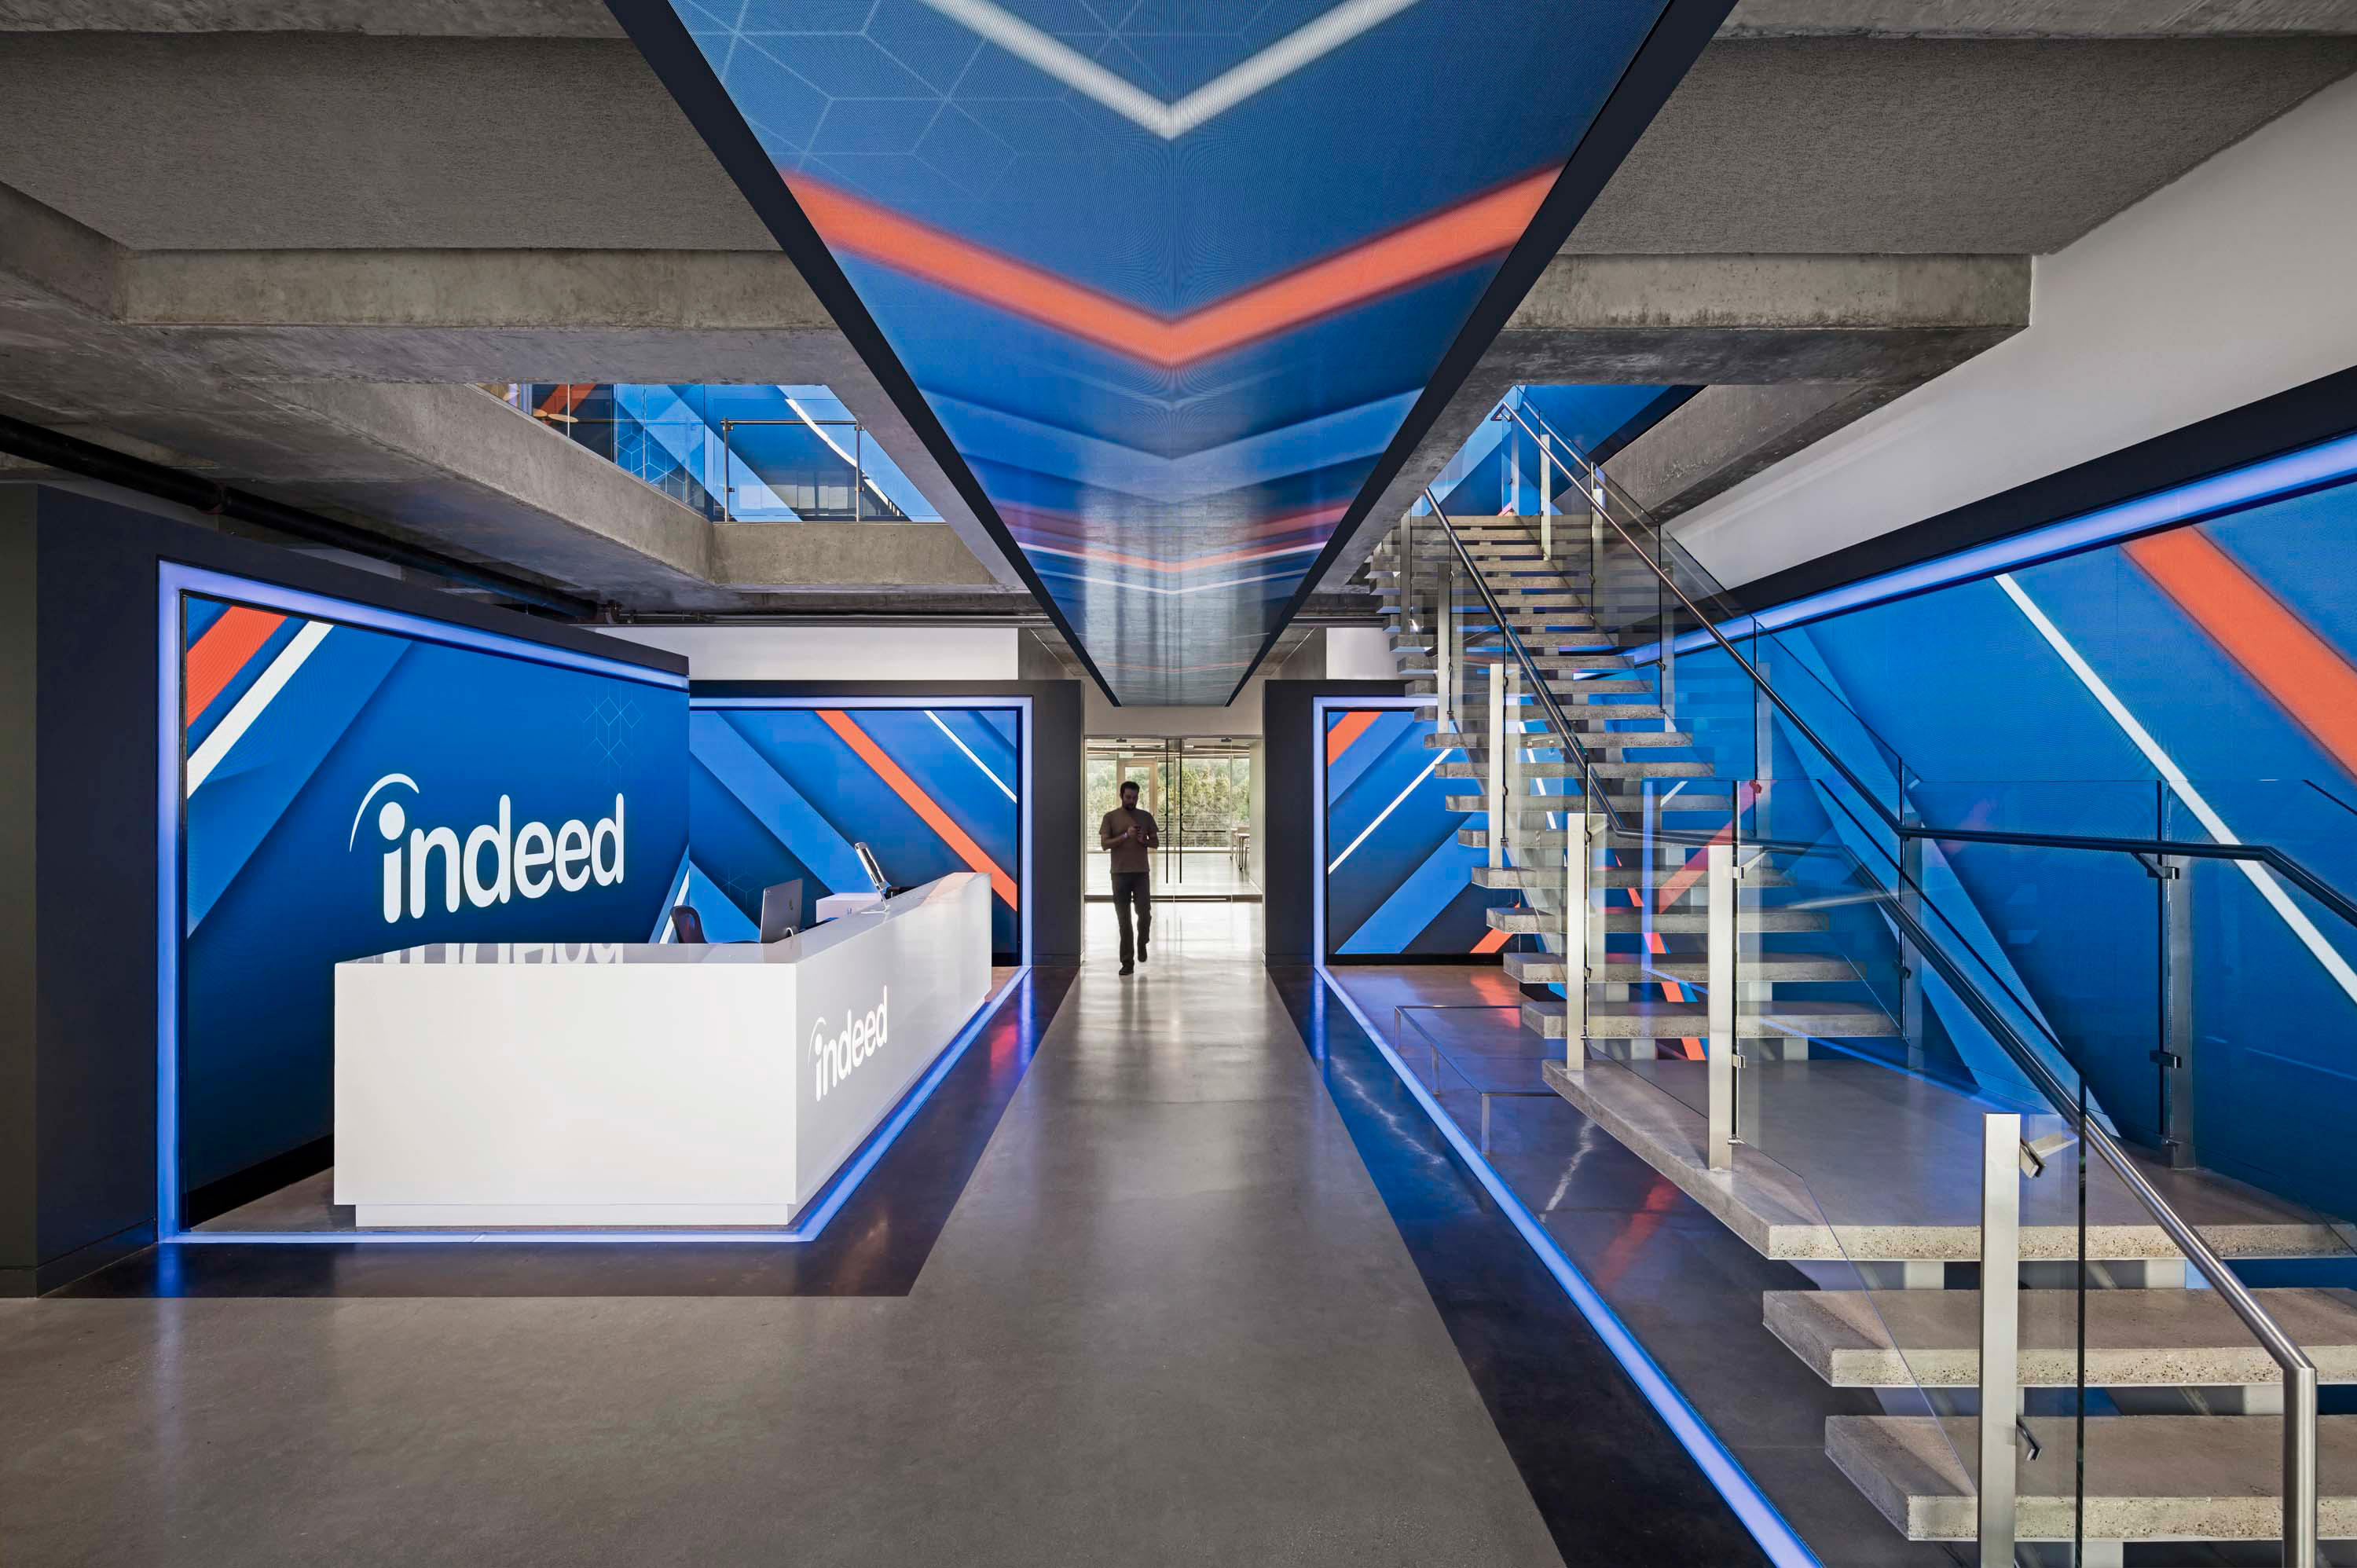 Reception desk of Indeed.com by Specht Novak Architects in Austin, Texas. Shot by Andrea Calo.